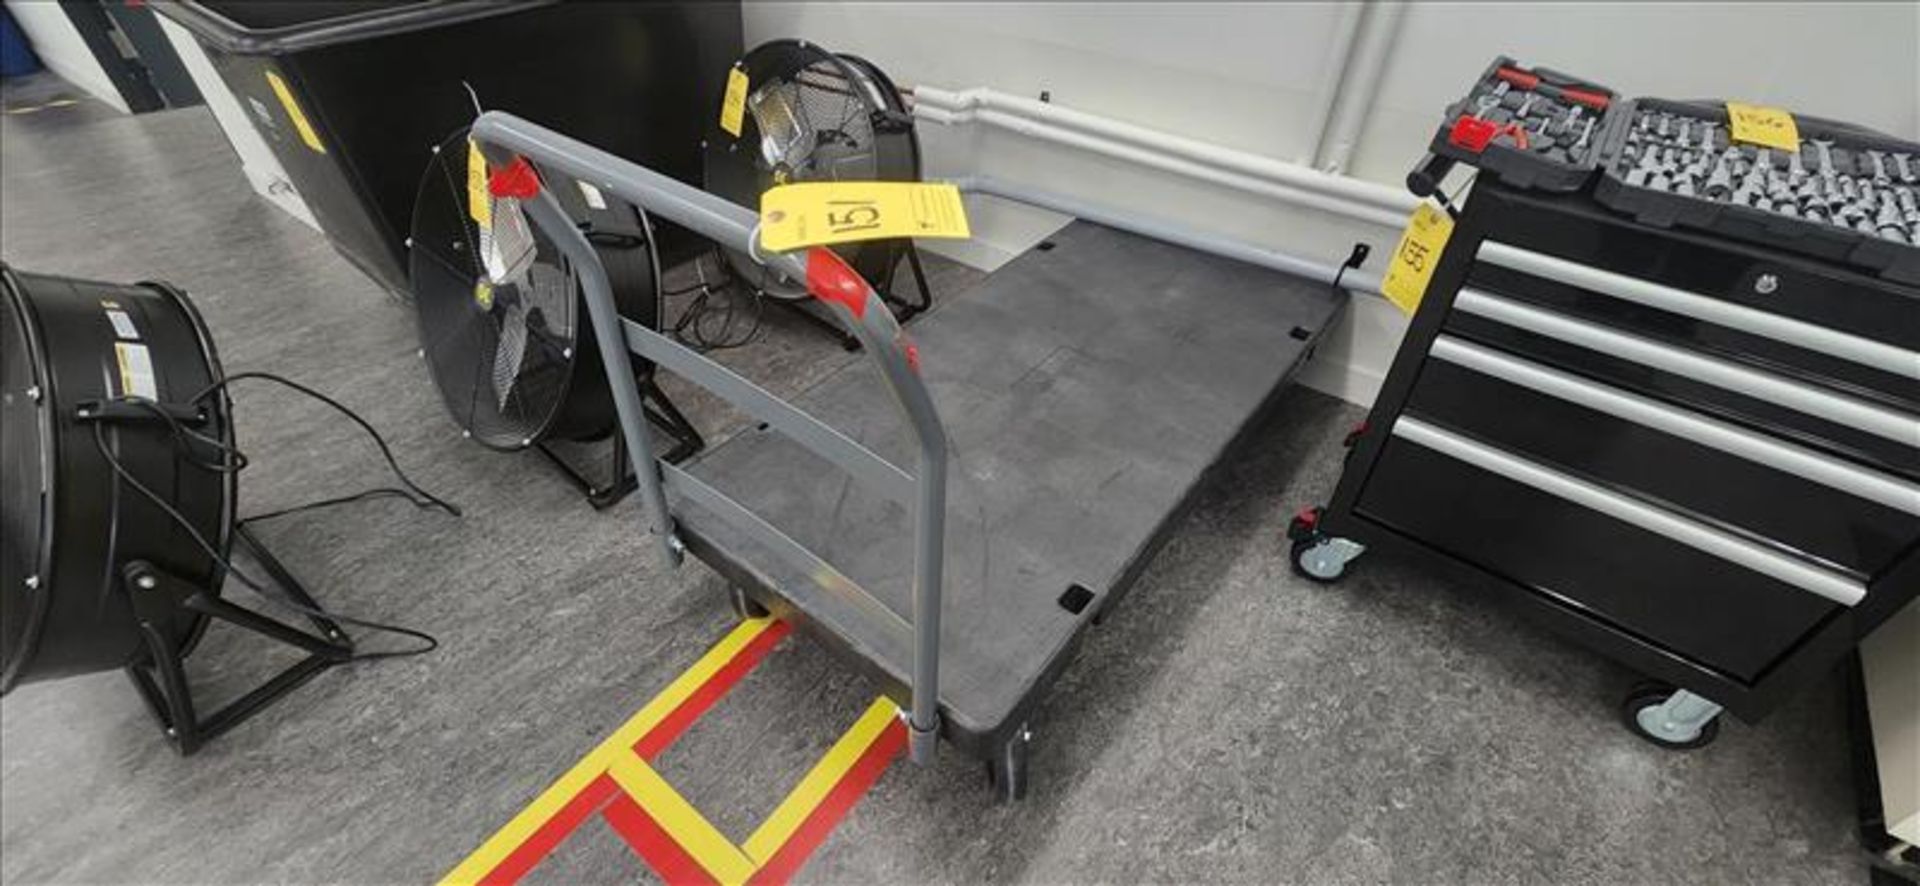 Uline Platform Cart approx. 30 in. x 60 in. (Delayed Removal)